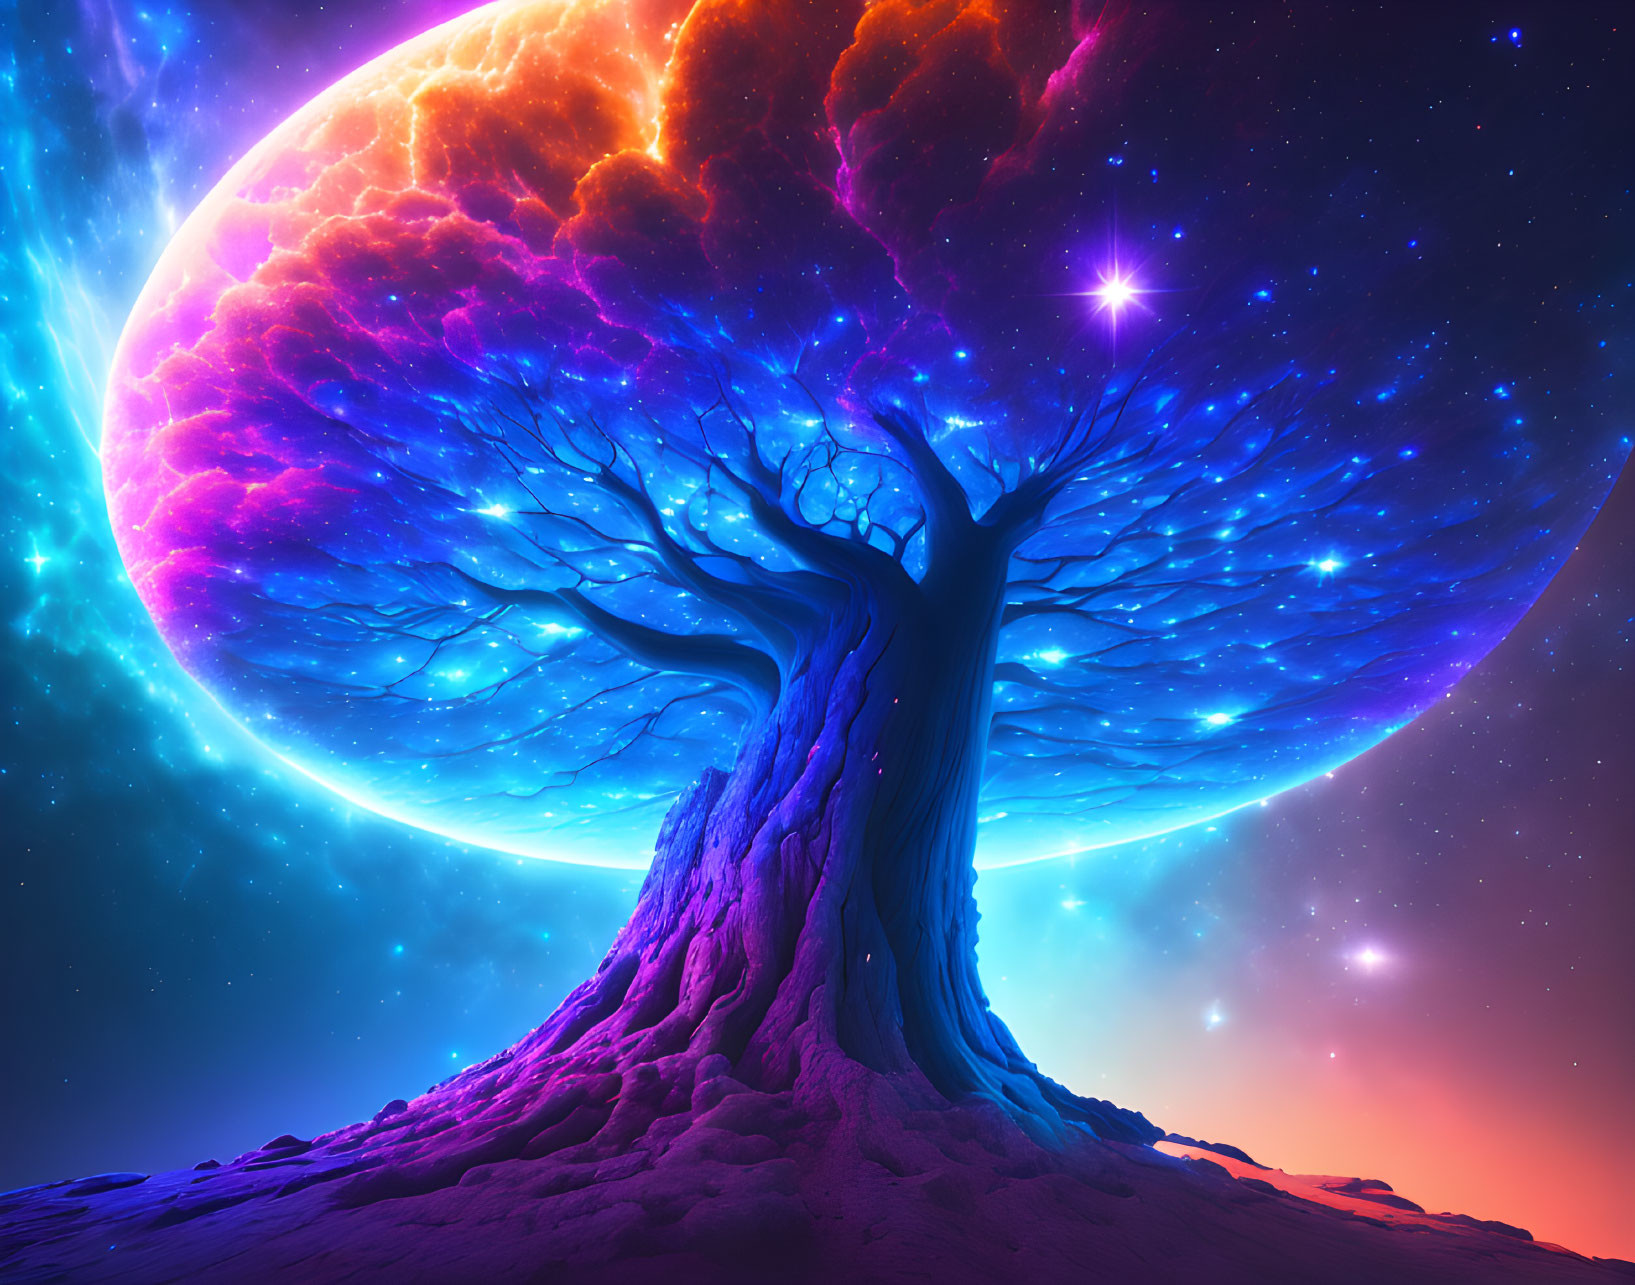 Majestic tree illustration with glowing branches in cosmic setting